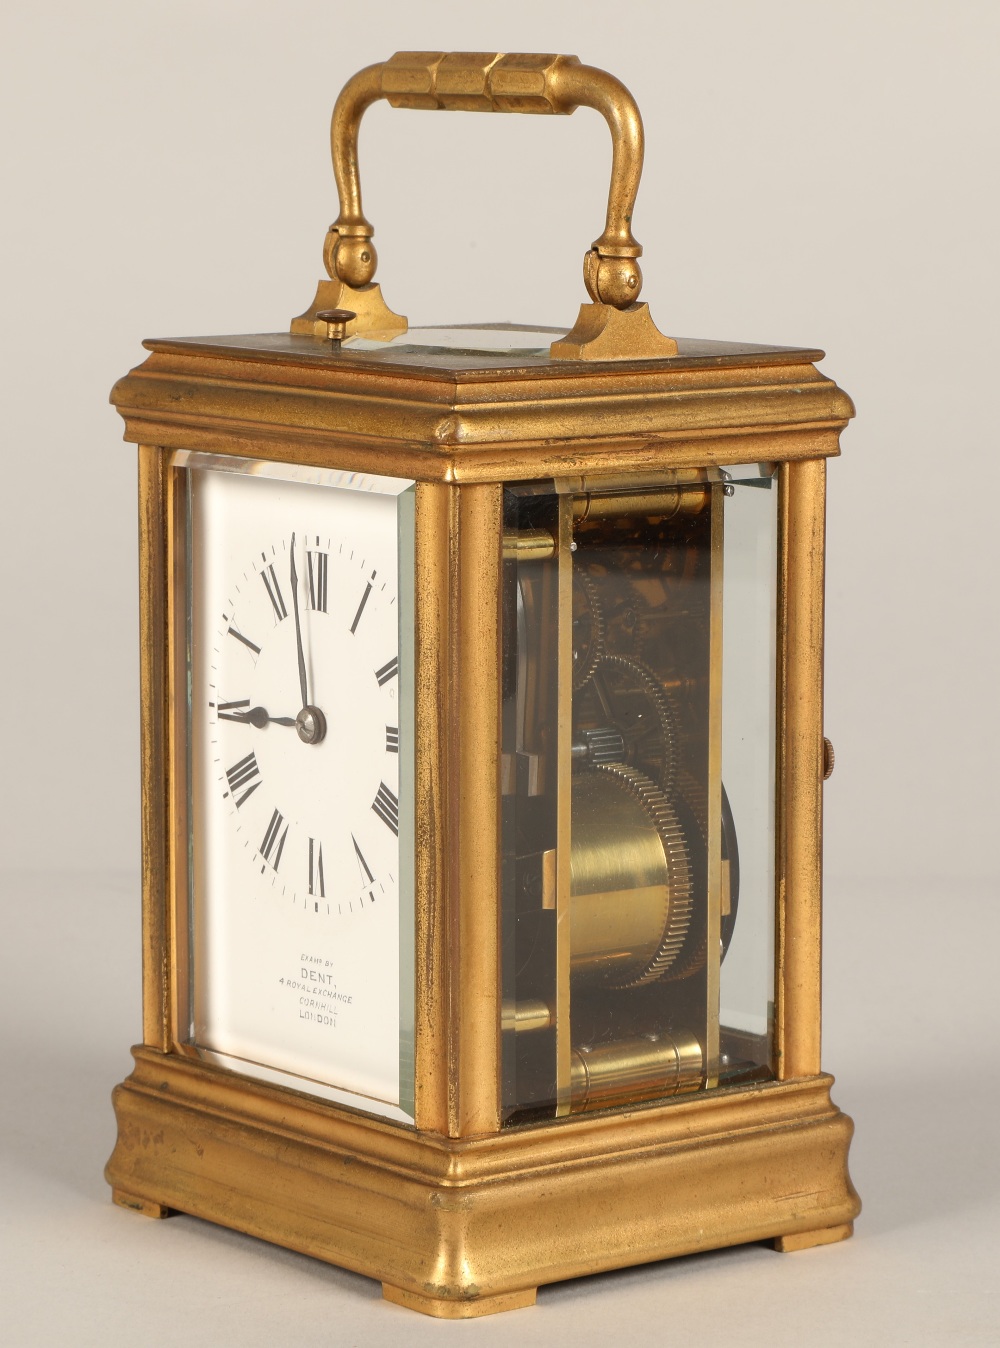 French brass repeating carriage clock, engraved AIGUILLES on the back,  Examp by Dent, 4 Royal - Image 7 of 12